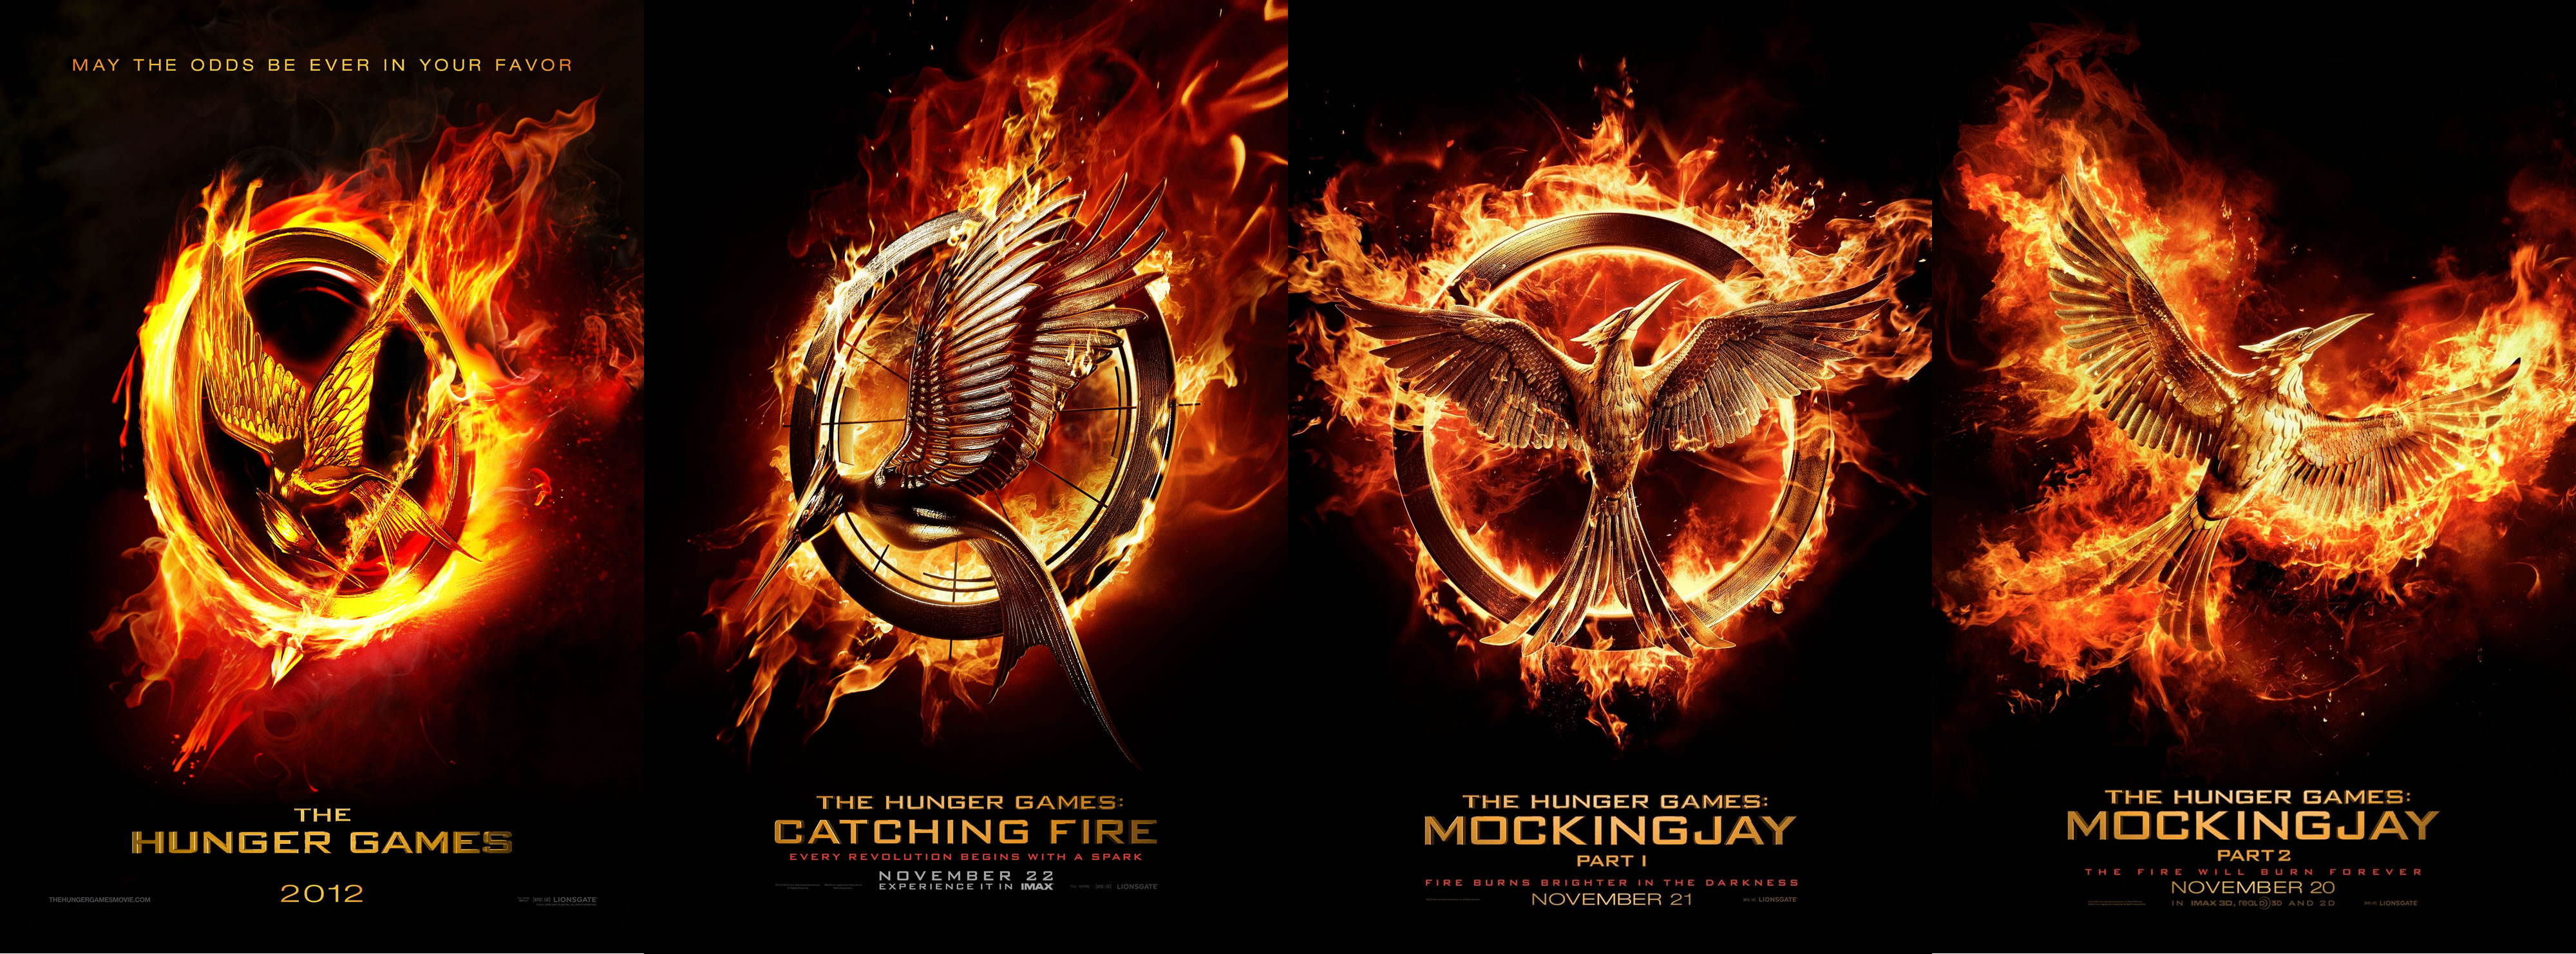 4000x1481 > The Hunger Games Wallpapers